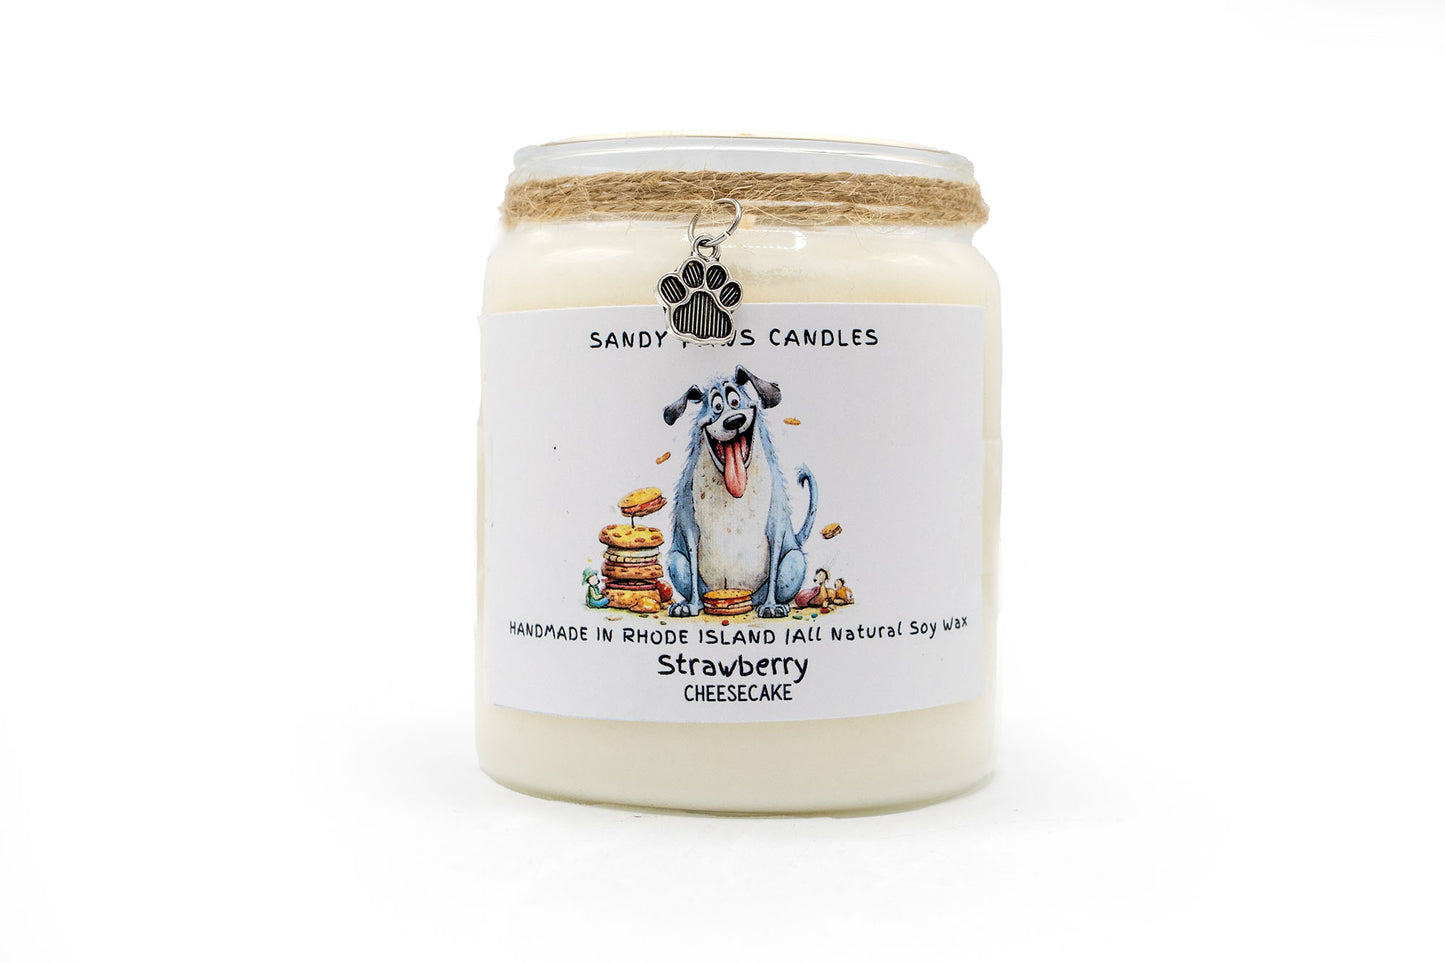 "Quirky" Dog Jar Candles